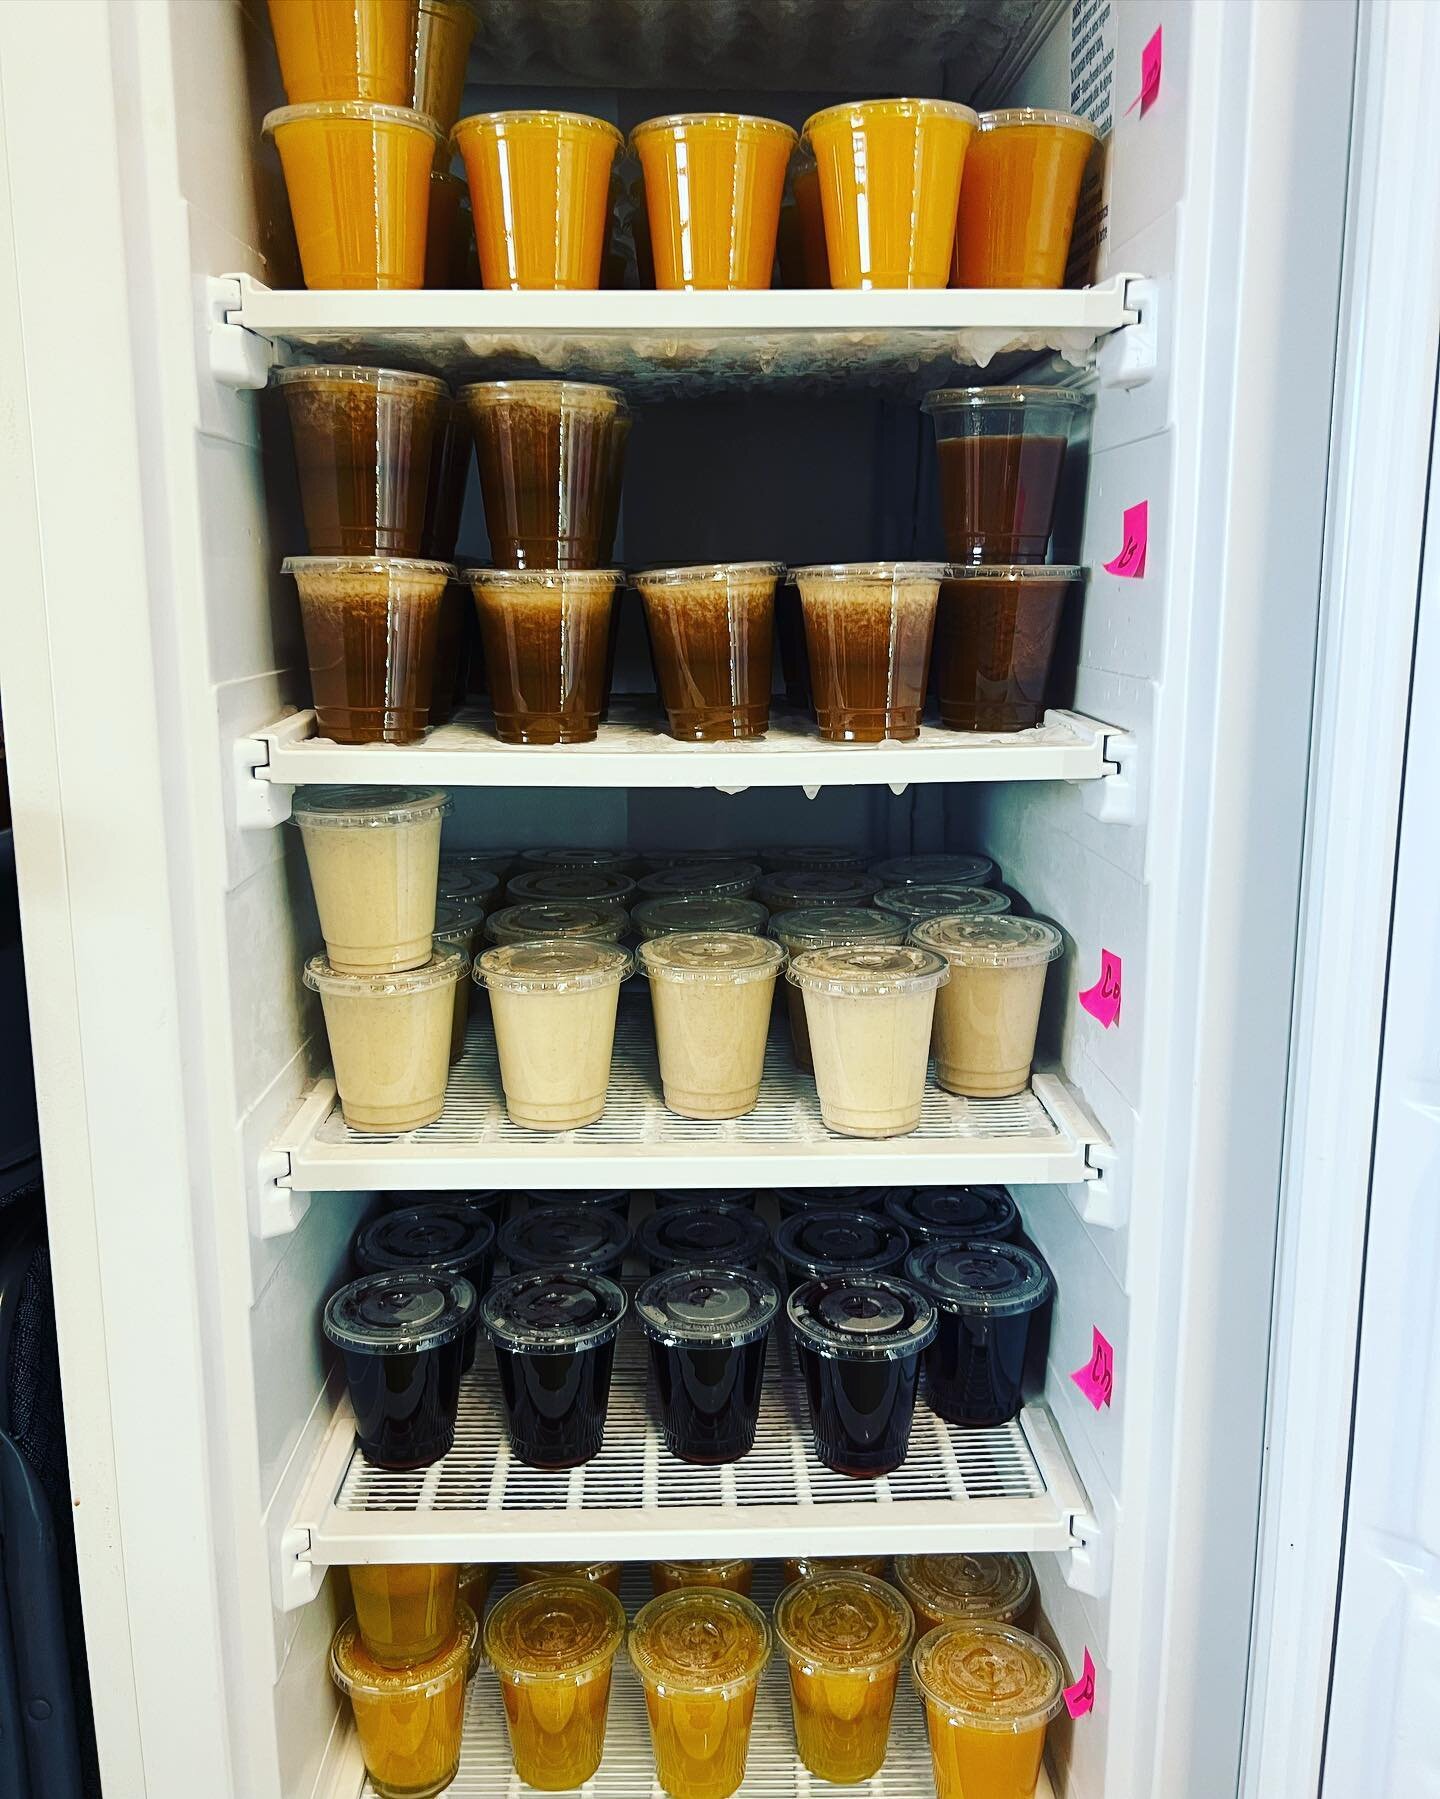 BATCH 1: All Limber flavors are re-stocked but currently freezing.. 

Im not complaining or nothin but ya&rsquo;ll wiped me out last weekend!! #SoGrateful 🙏🏼🙏🏼

🚨🚨🚨 FYI: our last open day for this summer season will be on Monday Sept 4th (Labo